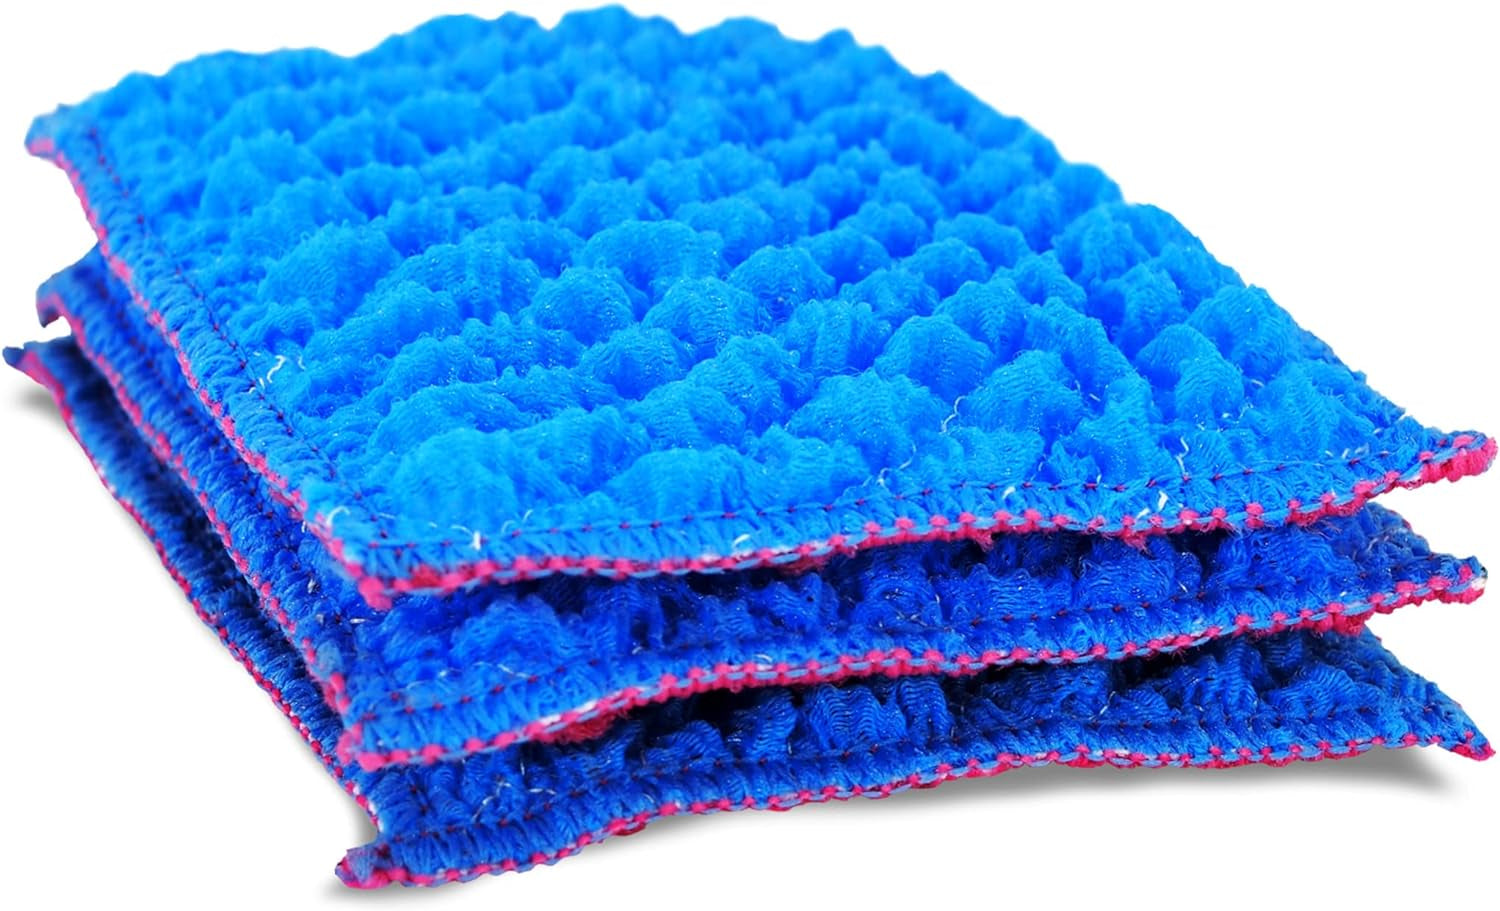 No Odor Scrub Pads (3PK) - Best Alternative to Kitchen Sponges and Scrubbers - Ecofriendly Reusable Sponge & Scrubber for Cleaning Dishes - All Purpose Scrubbing Pads - Dishwashing, Camping